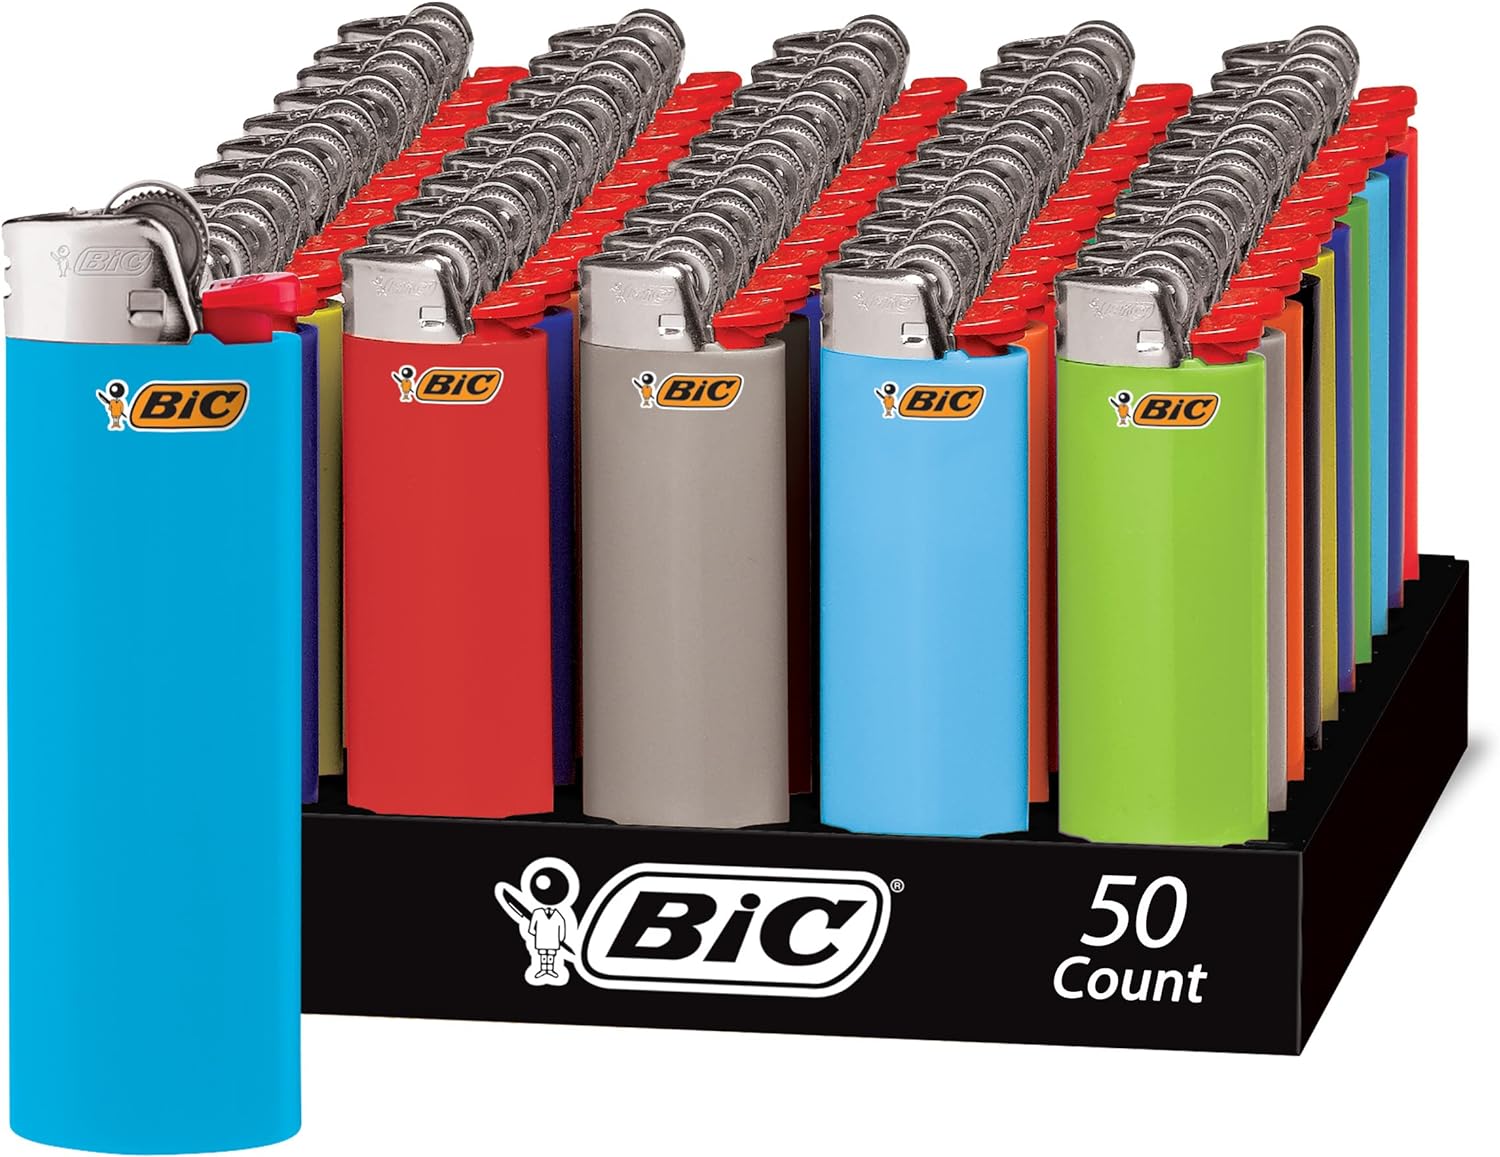 BIC Classic Lighter, Assorted Colors, 50-Count Tray, Up to 2x the Lights (Assortment of Colors May Vary)